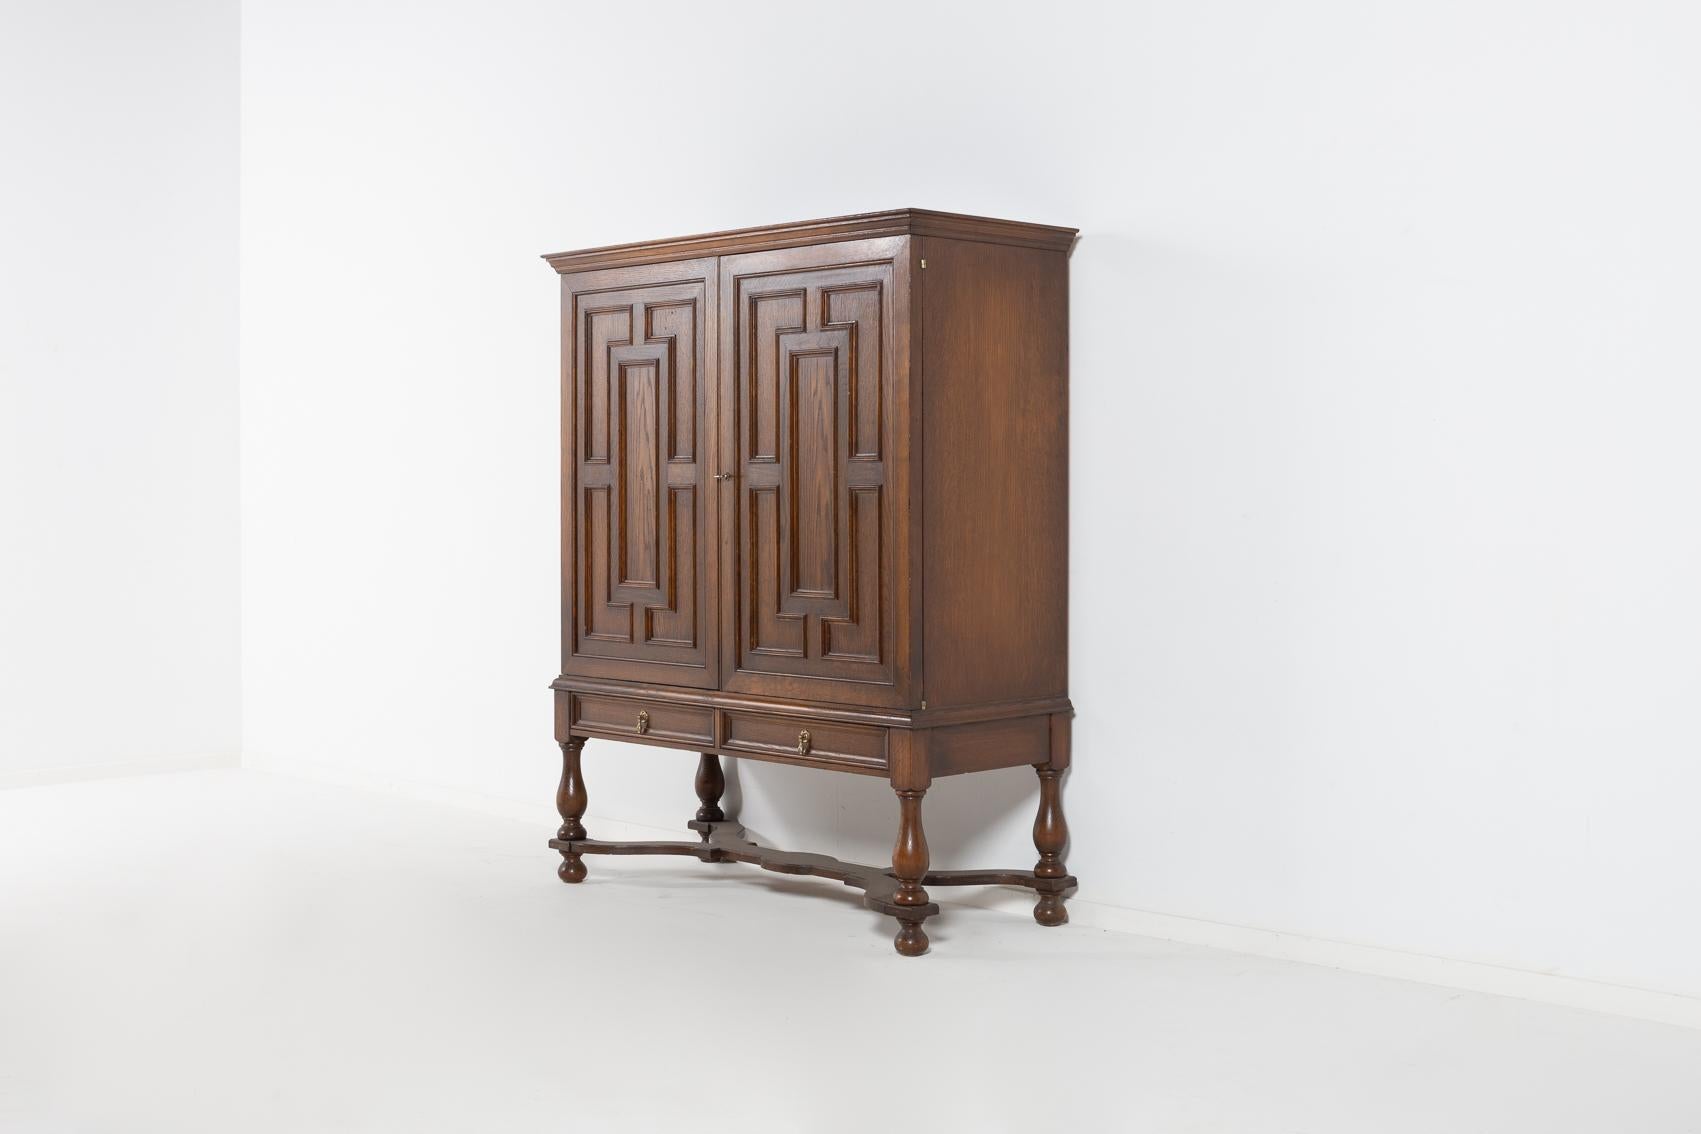 Scandinavian Modern cabinet by Swedish icon Axel Einar Hjorth for Nordiska Kompaniet, produced in 1930s. The piece is made of stained oak, equipped with 2 drawers and 2 doors. Inside has a space for wine bottles, wine glass holders attached to